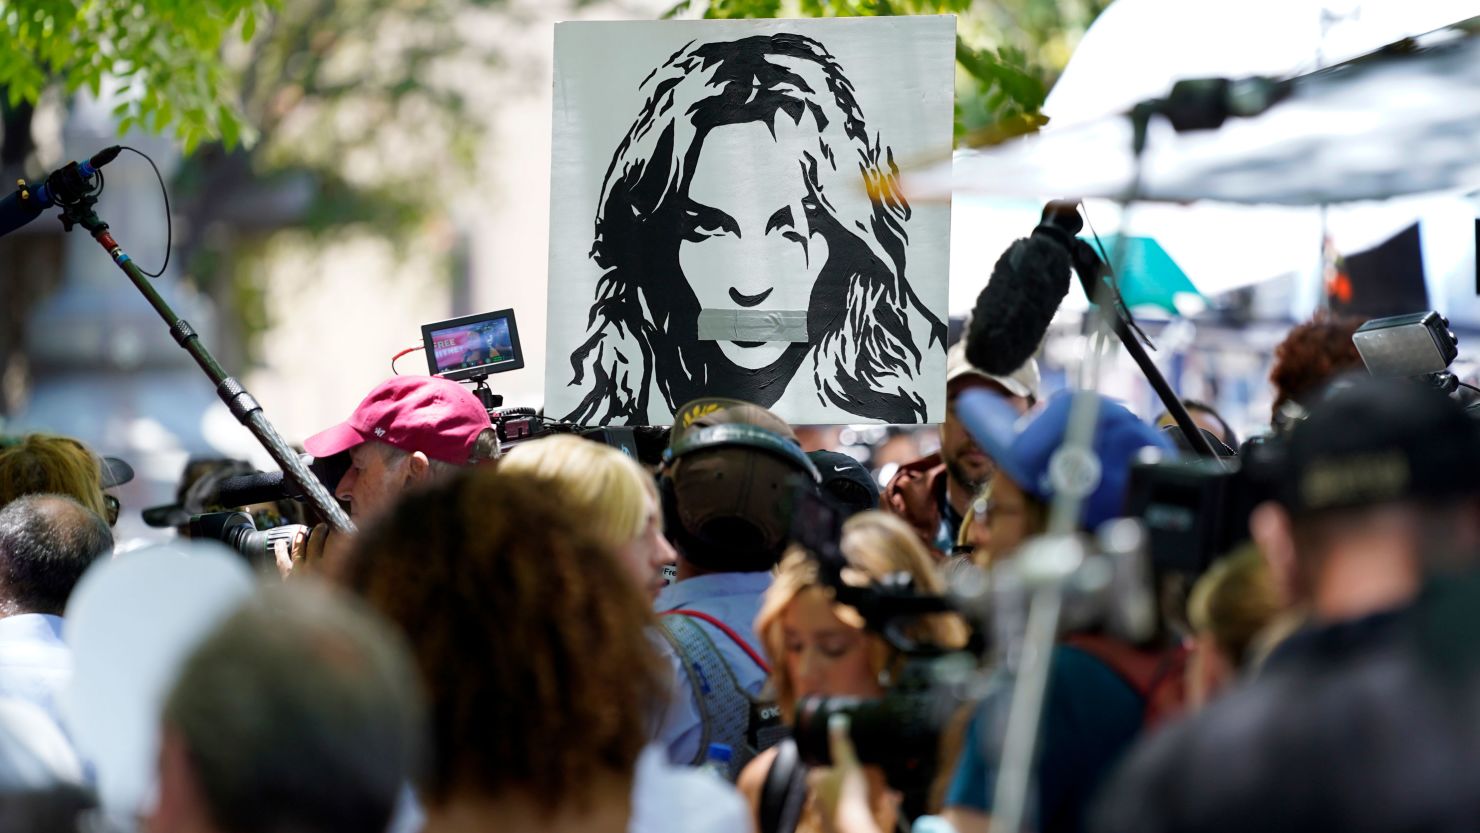 Supporters hold a portrait of Britney Spears at a rally in Los Angeles on June 23 outside a court hearing regarding the pop singer's conservatorship.